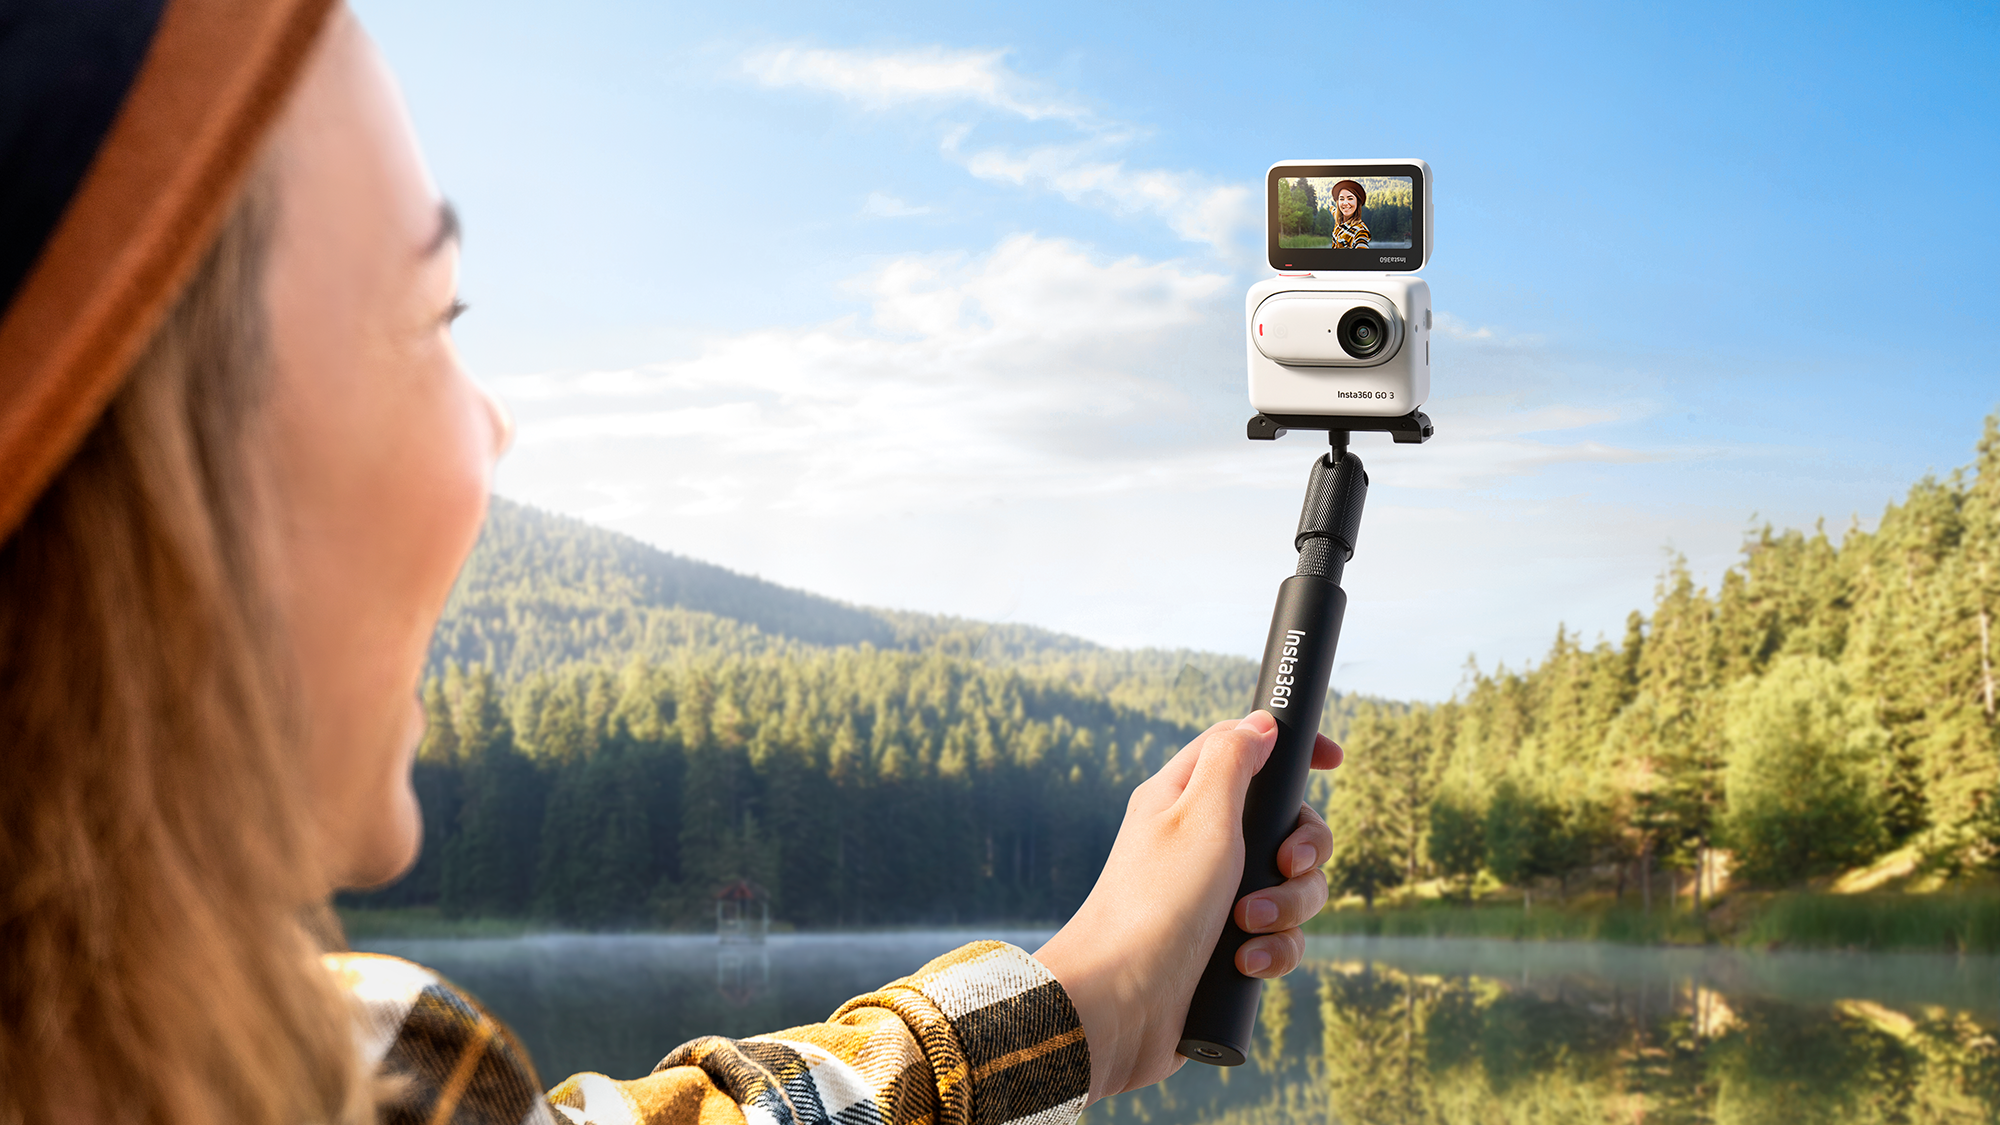 Review: The Insta360 GO 3 action camera is also a tiny vlogging camera